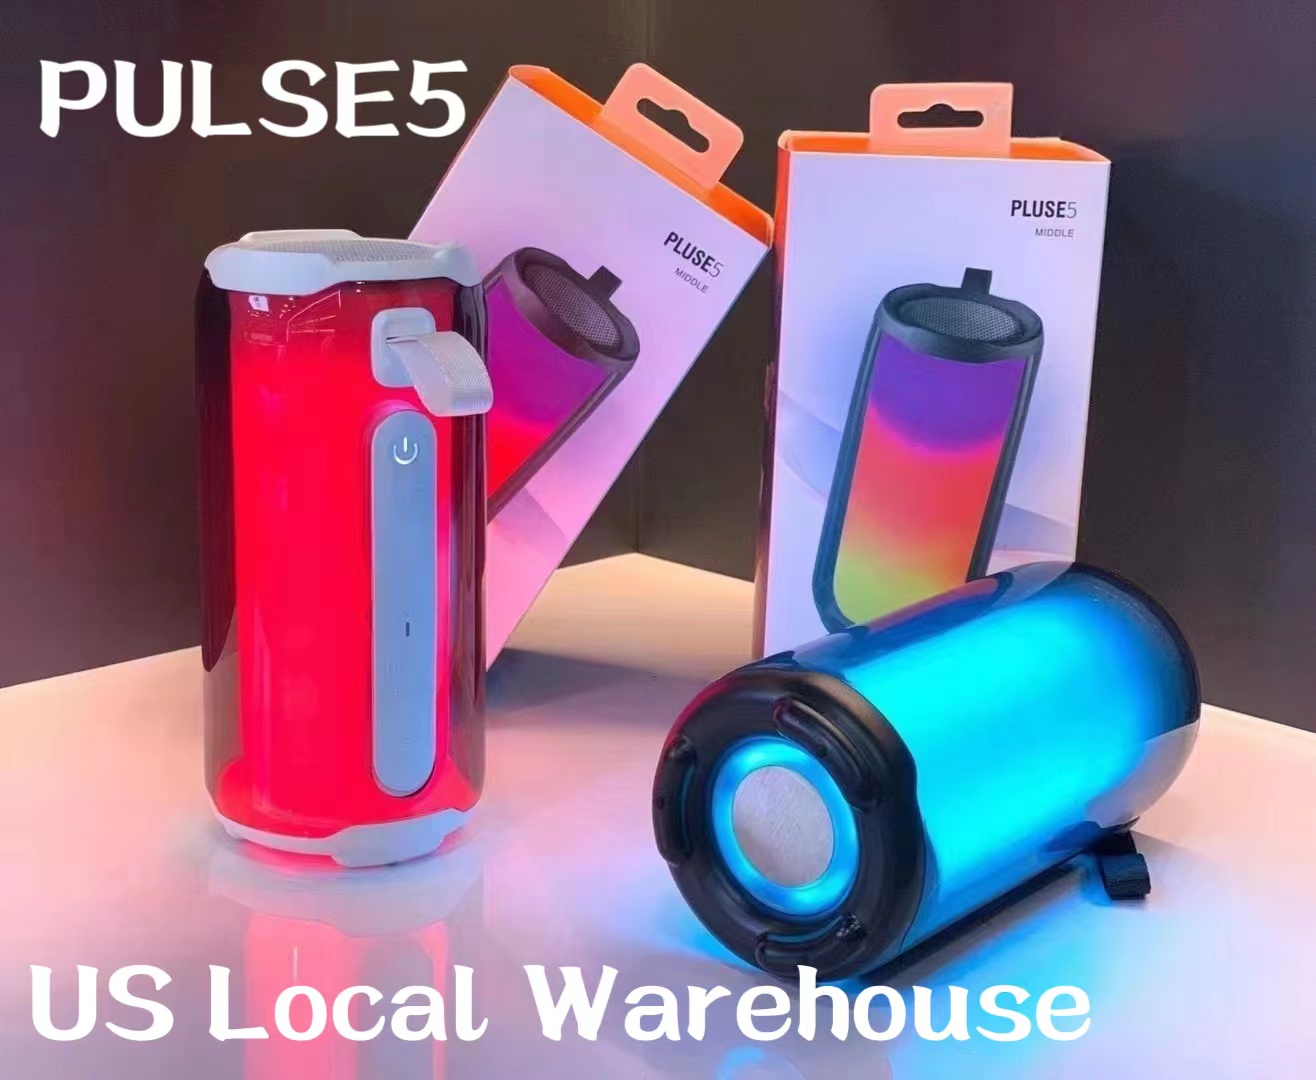 5 Pulse Speakers Wireless Bluetooth Speaker PULSE5 Waterproof Subwoofer Bass Music Portable Audio System Local Warehouse PULSE